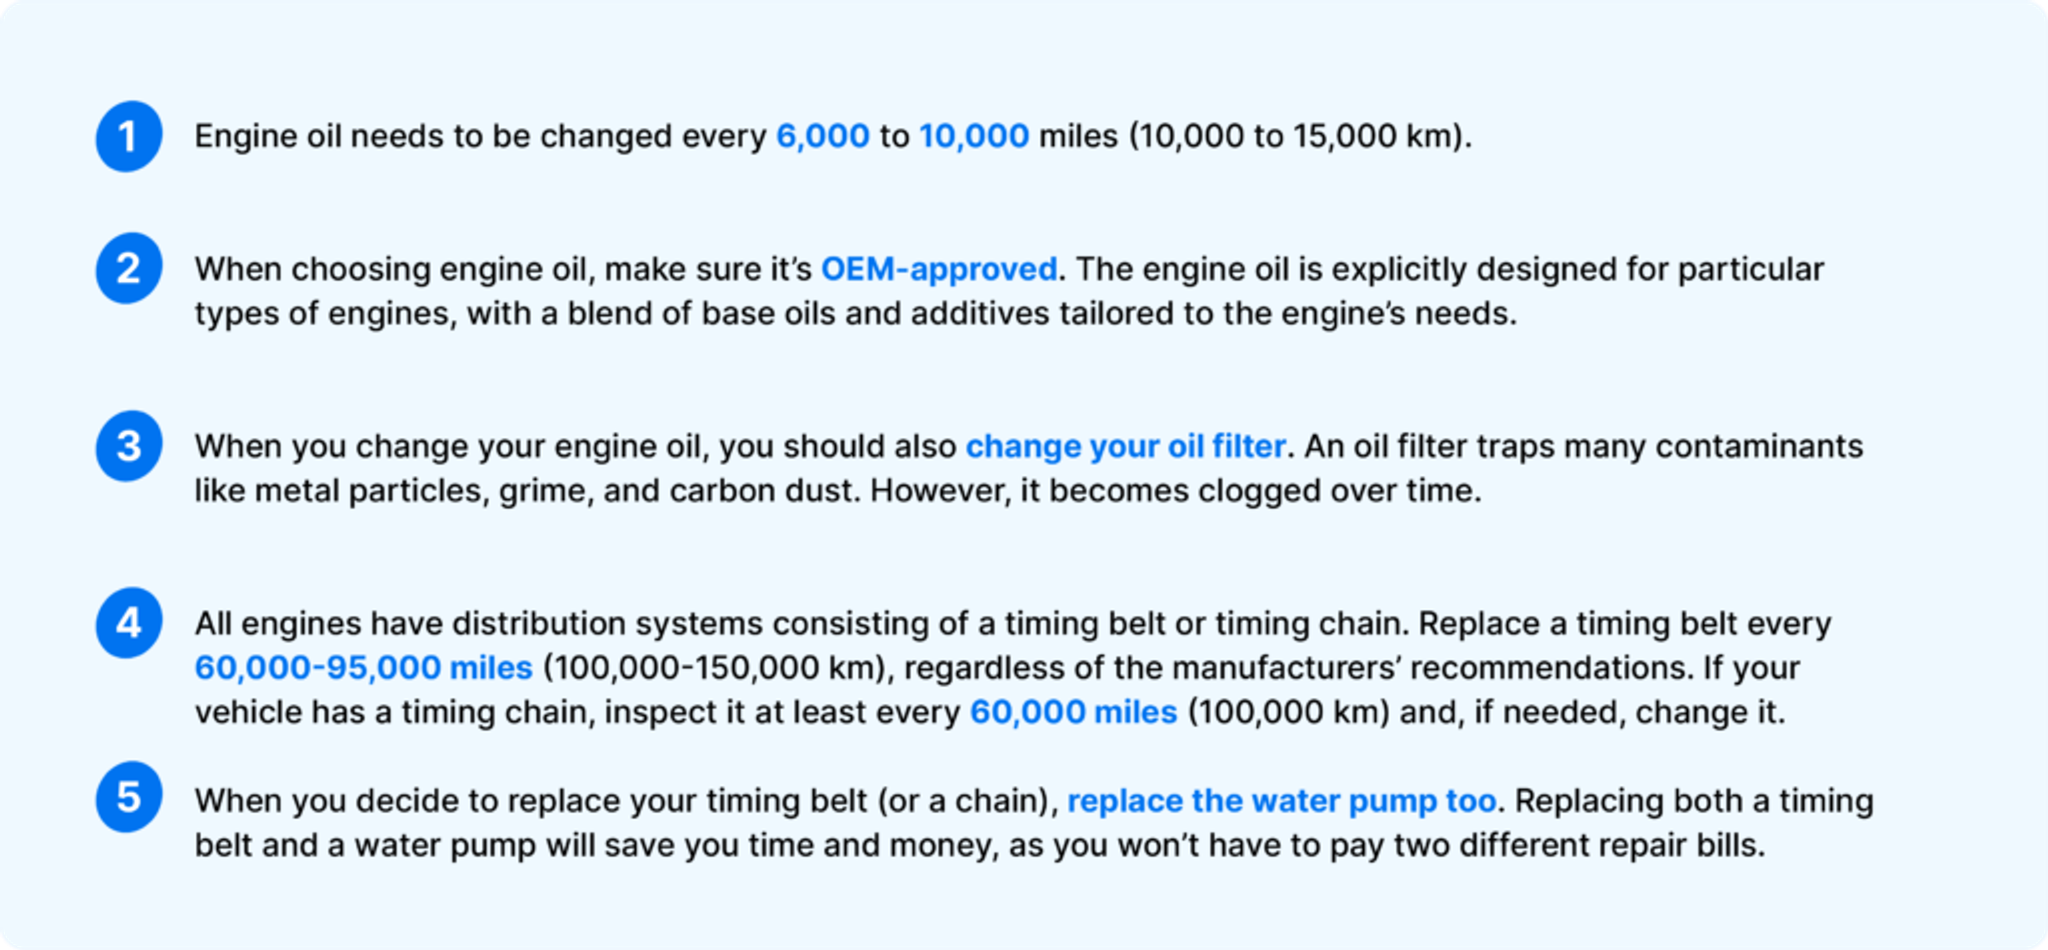 List of how to make your engine more reliable.